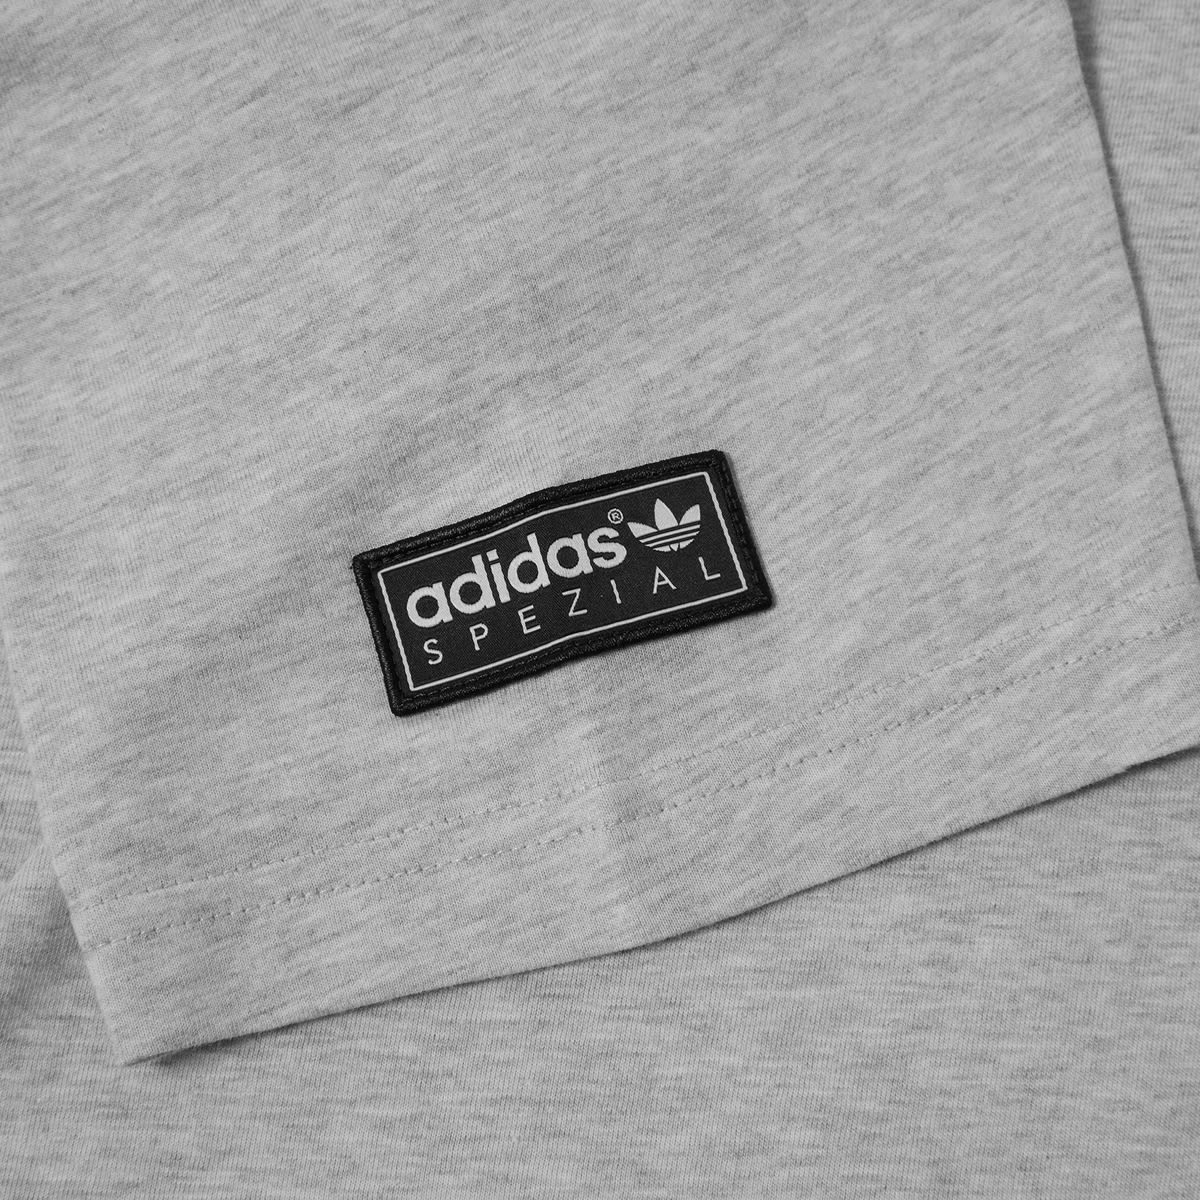 Adidas New Order x SPZL Tee (Light Grey Heather) | END. Launches